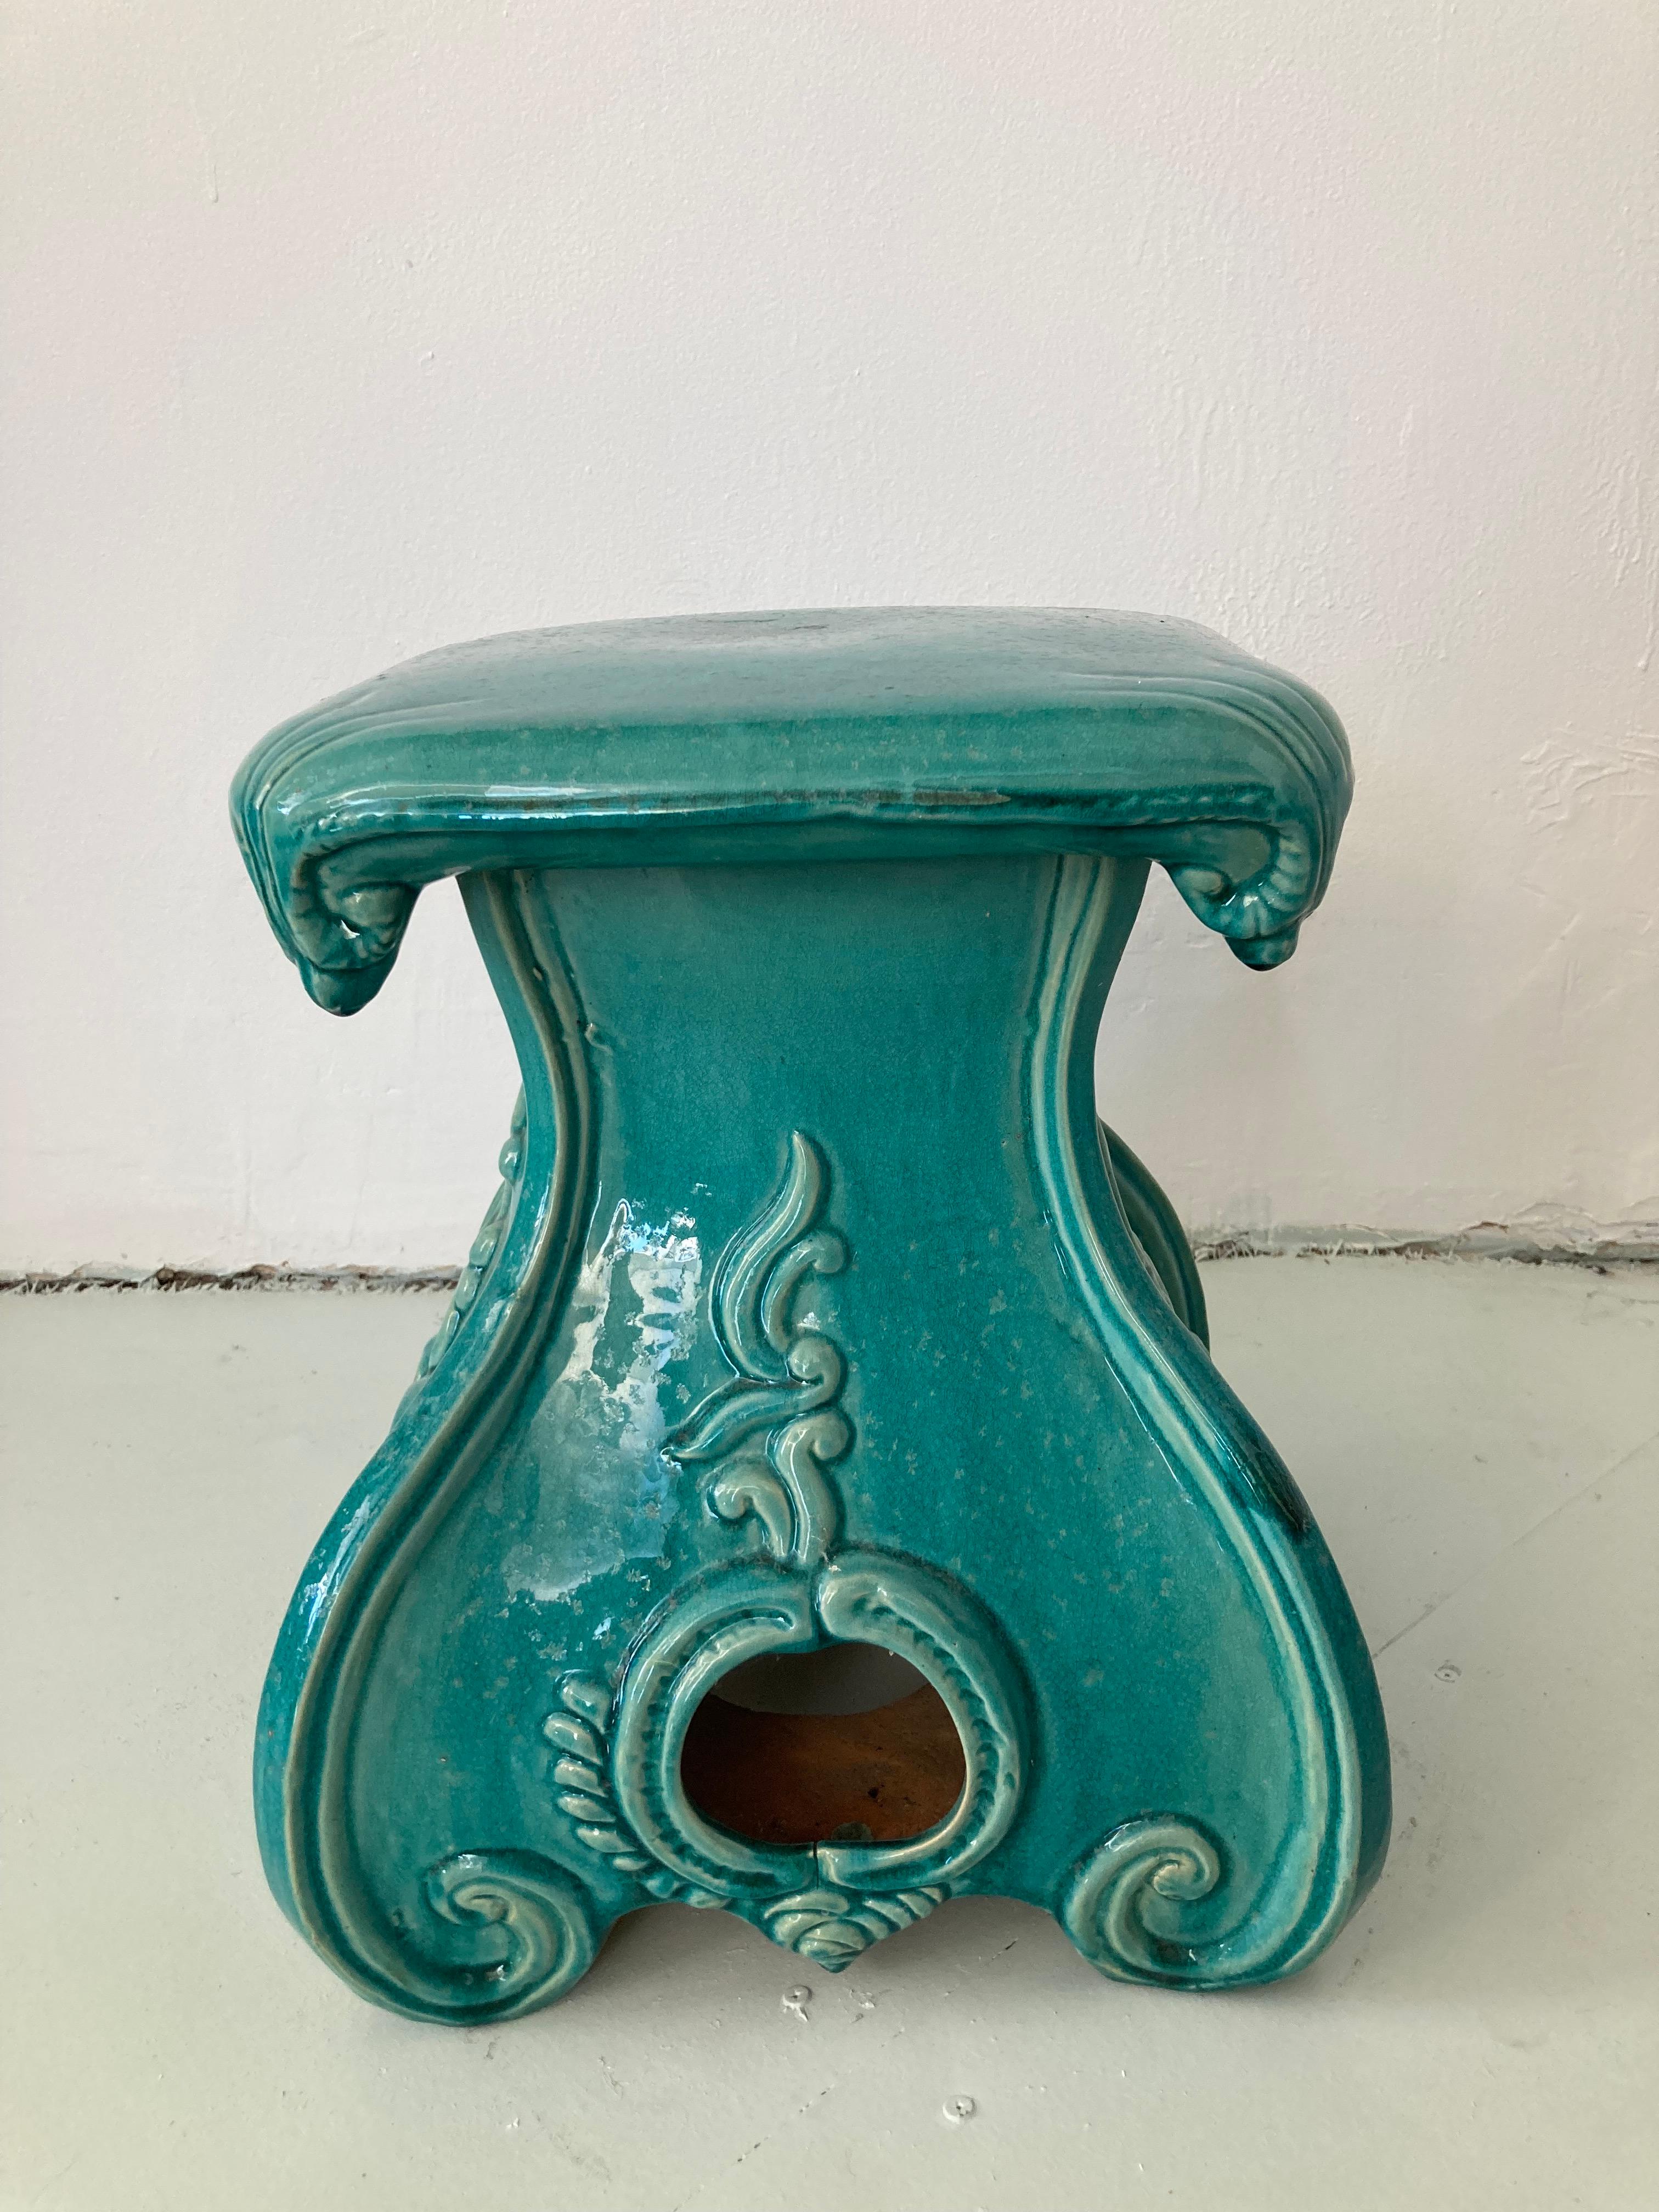 Other Turquoise Glazed Terra Cotta Garden Seat For Sale